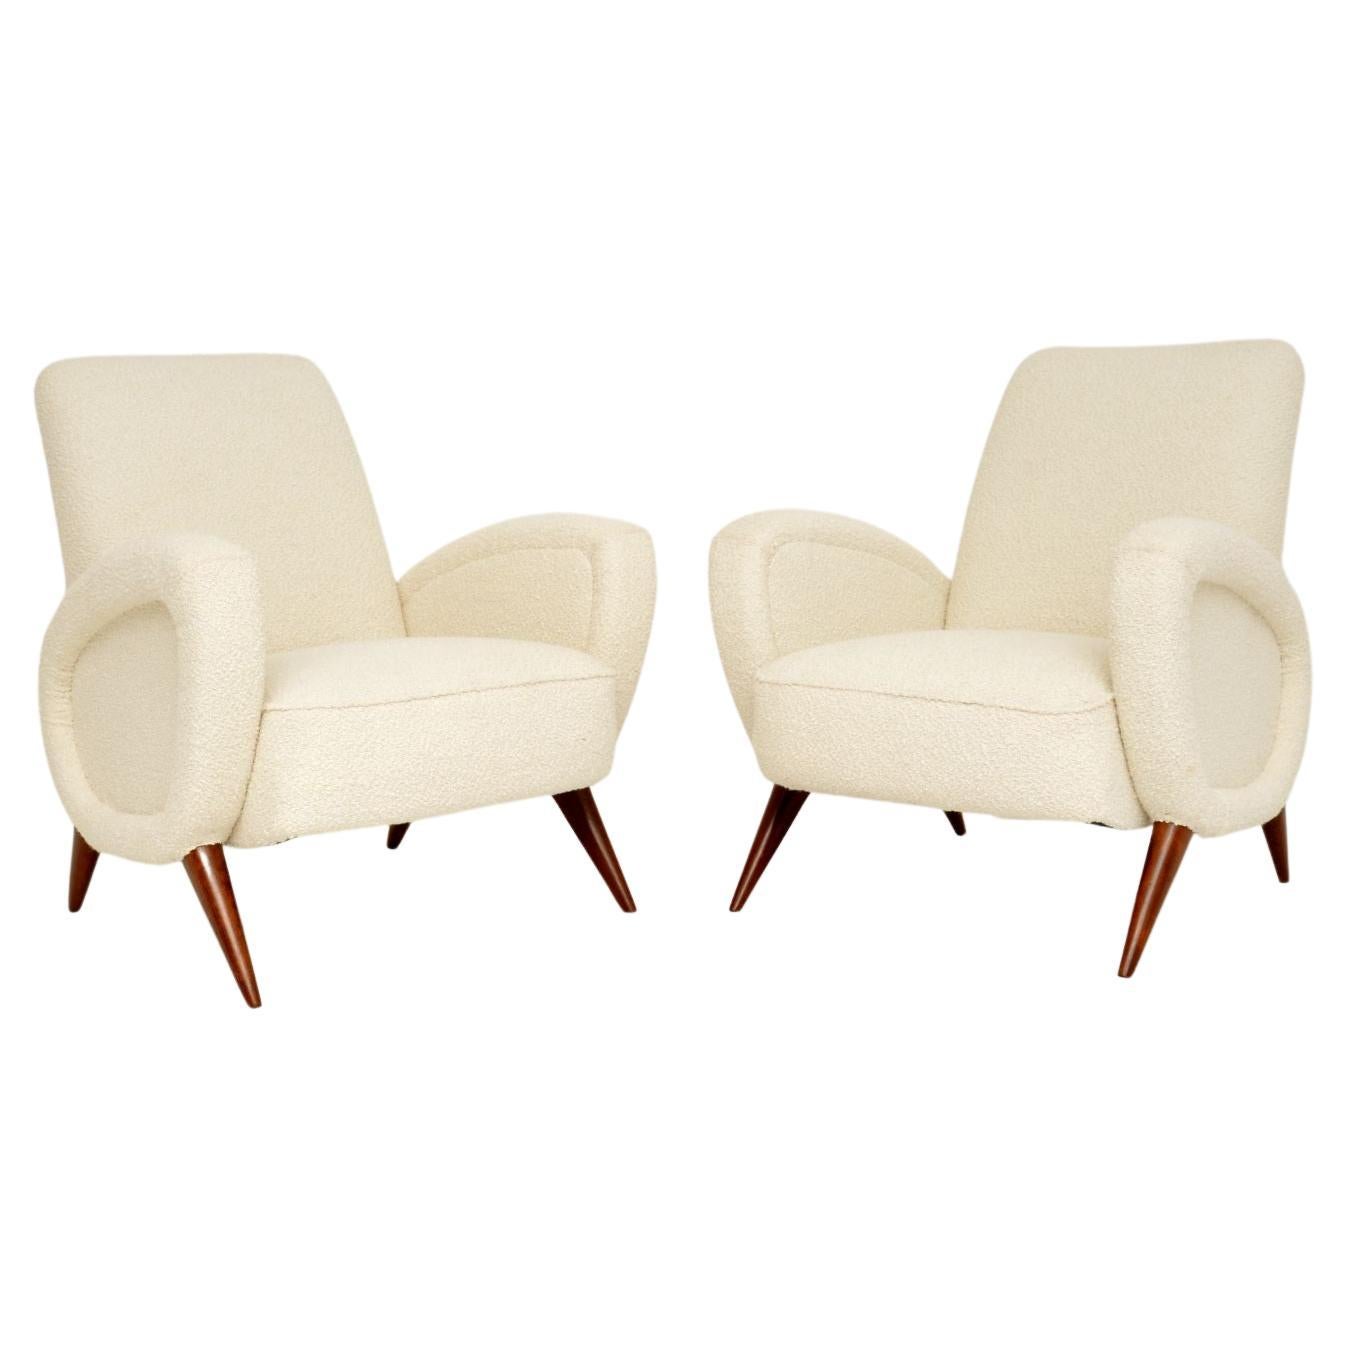 1960's Pair of Italian Vintage Armchairs Attributed to Marco Zanuso